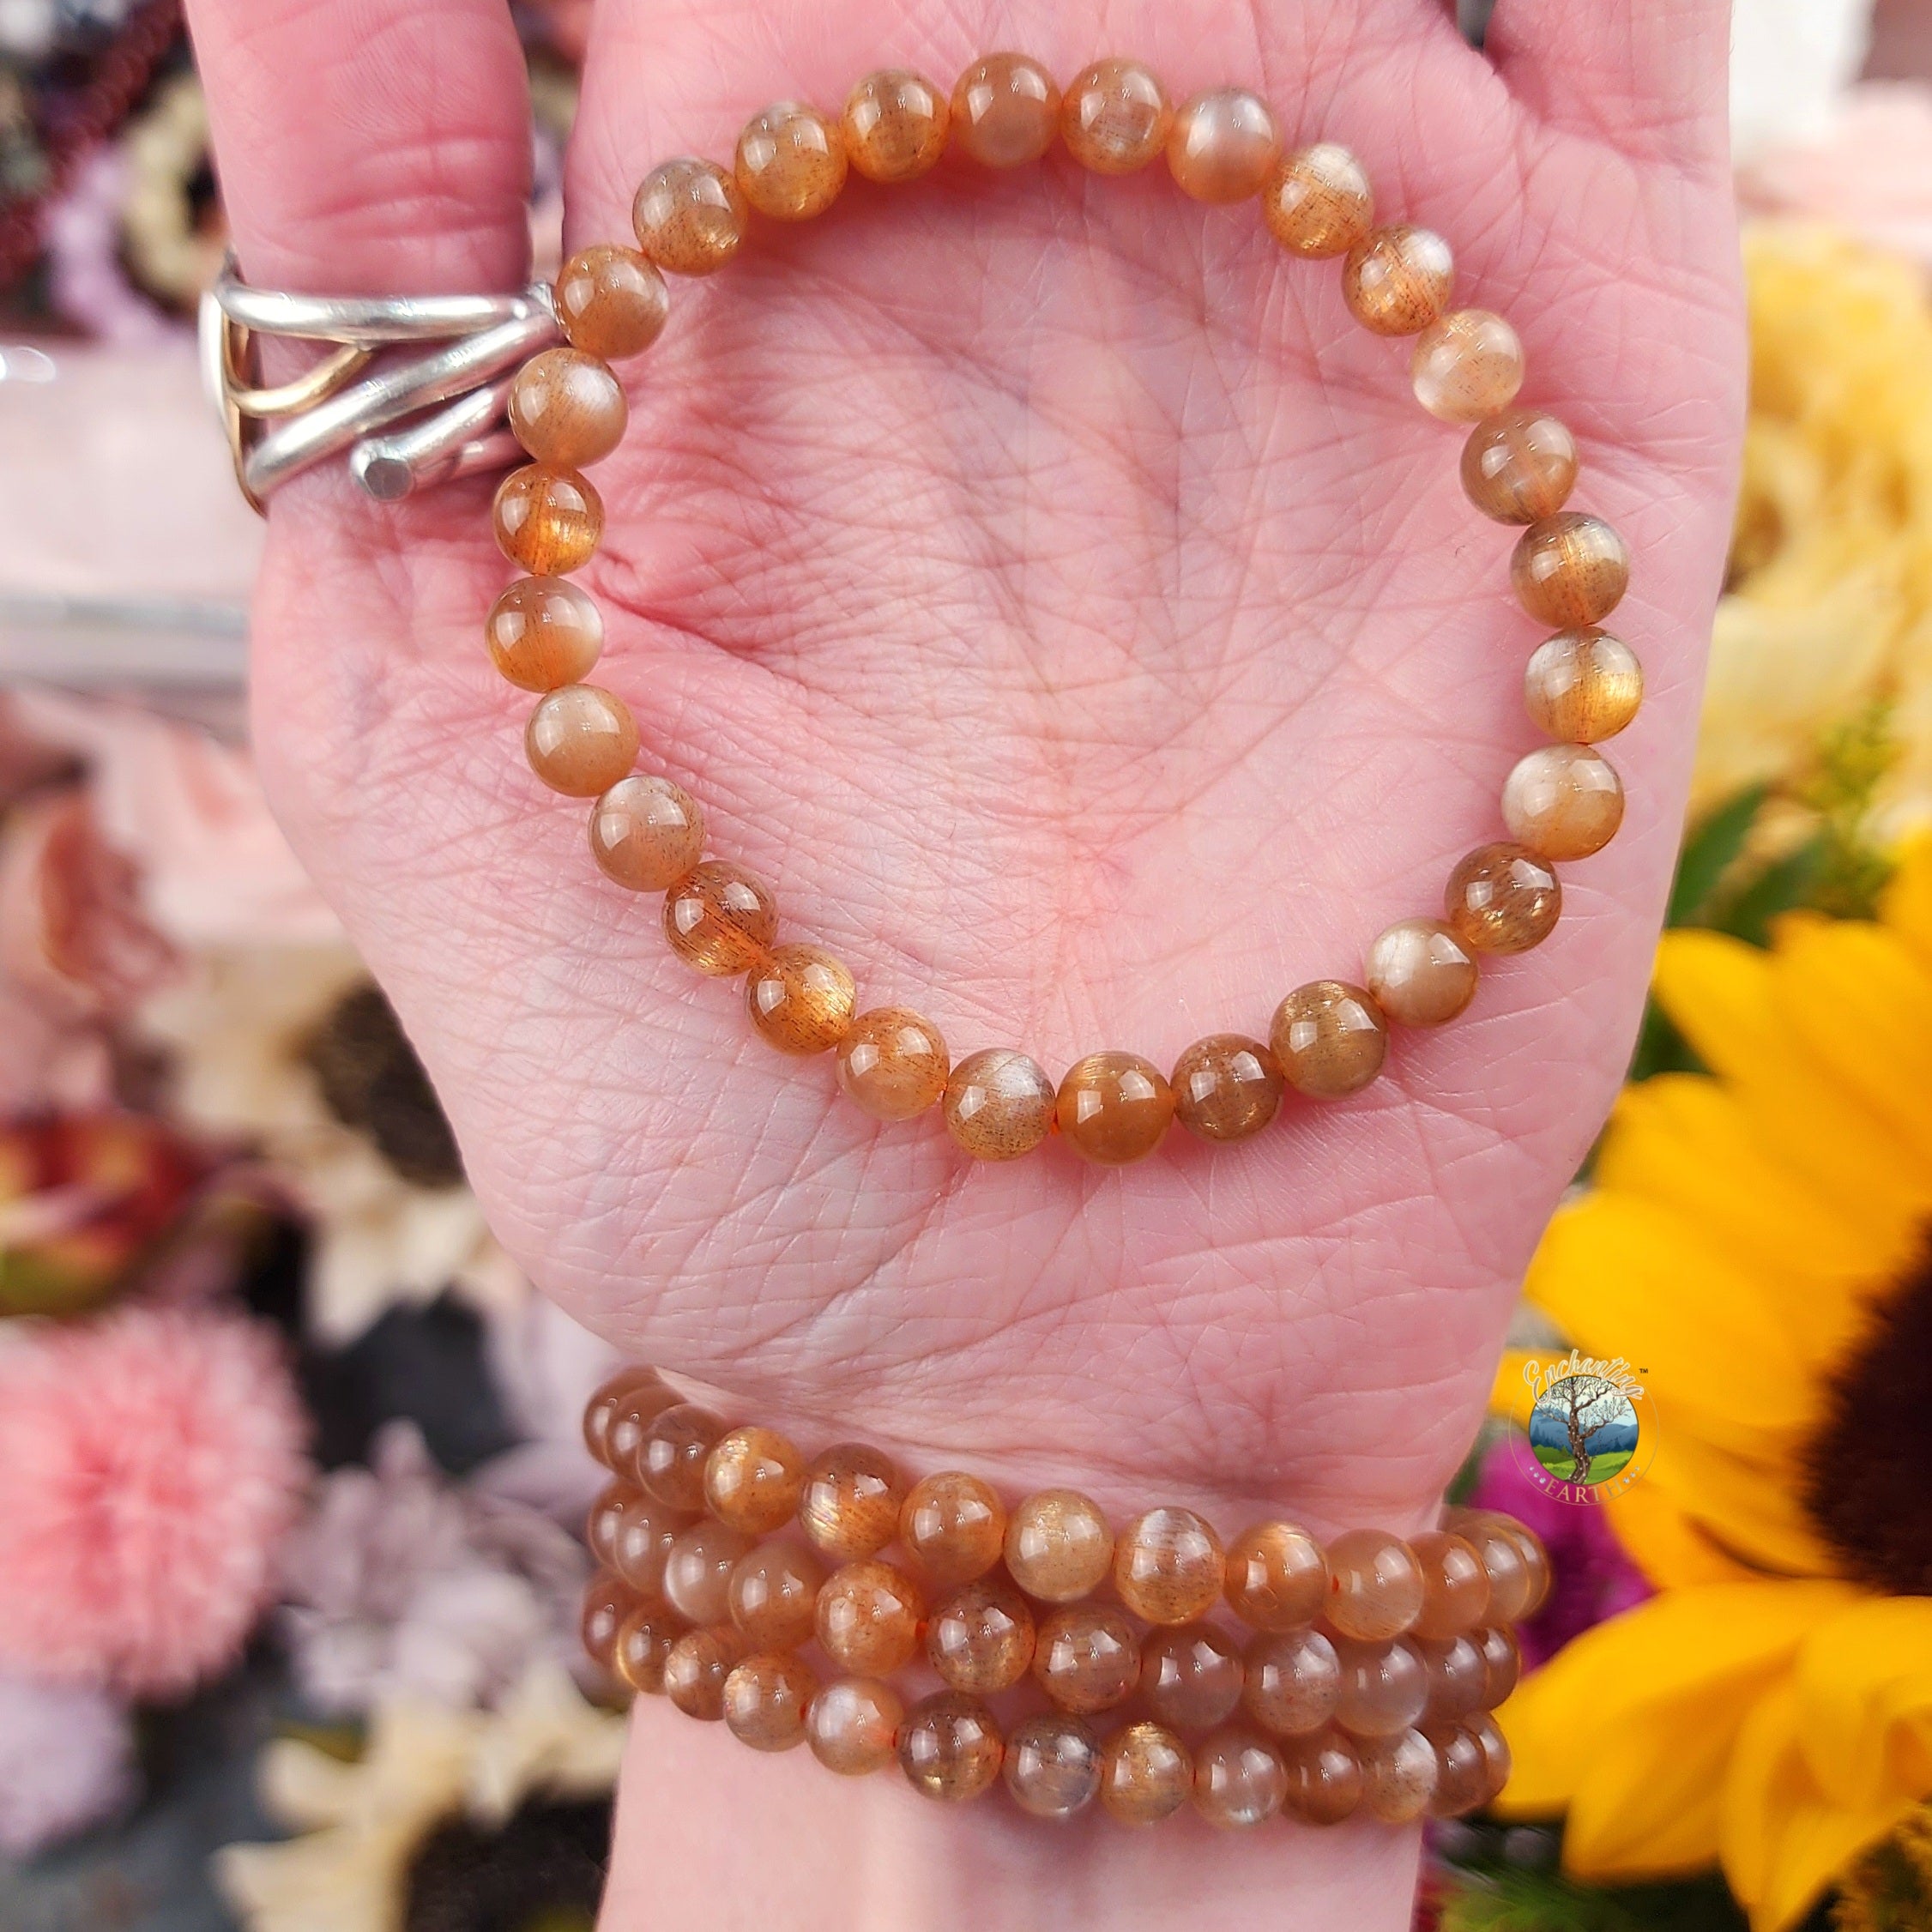 Amber Butter Stretch Bracelet Mixed With Sunstone, Moonstone and